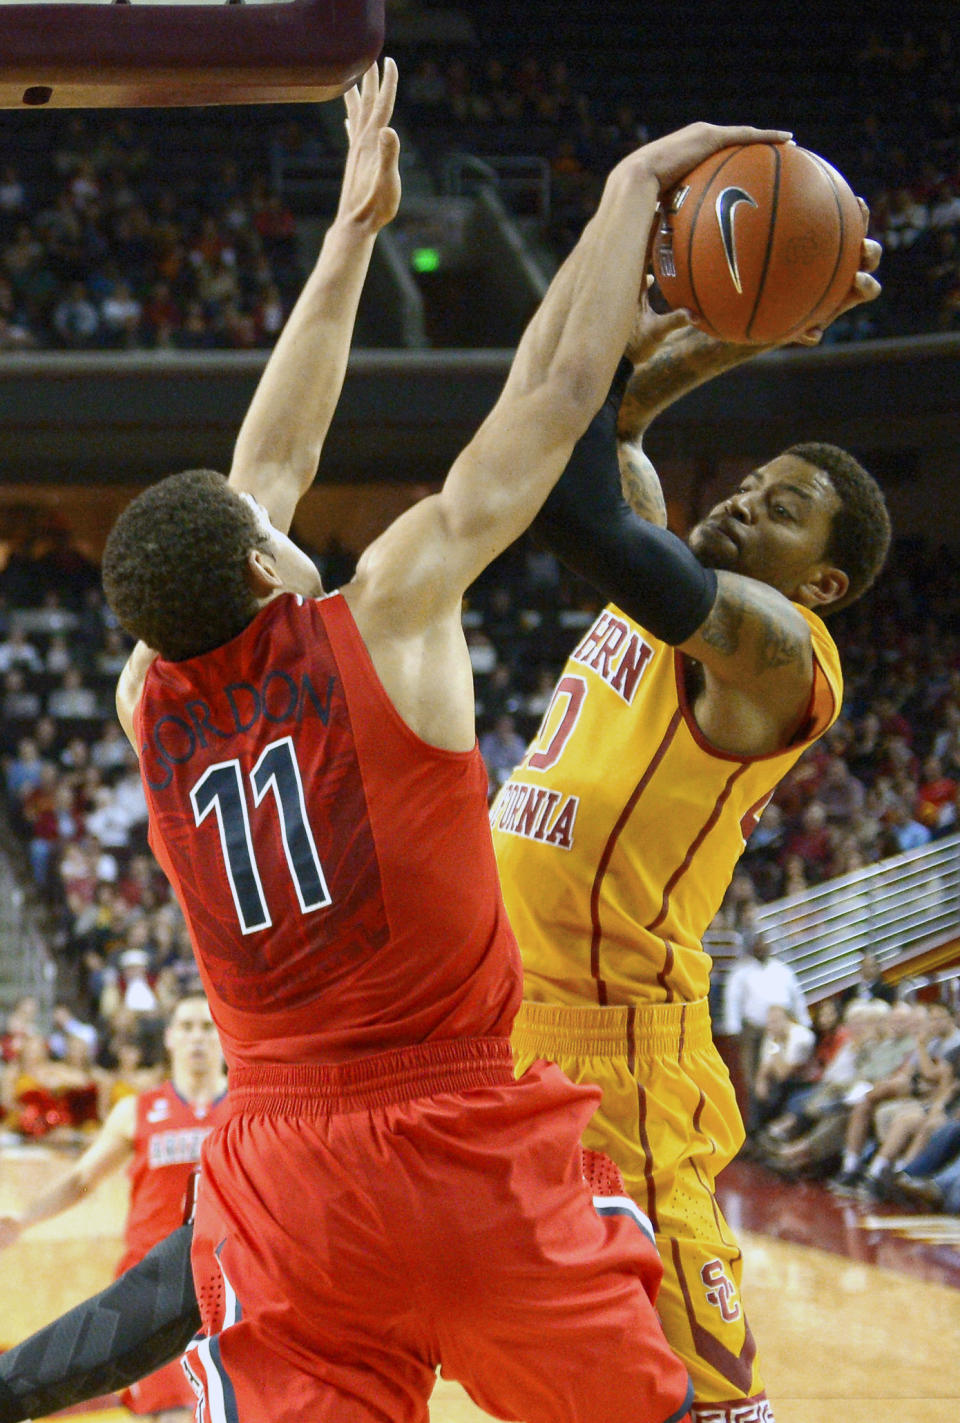 Southern California guard J.T. Terrell, right, has his shot blocked by Arizona forward Aaron Gordon during the first half of an NCAA college basketball game, Sunday, Jan. 12, 2014, in Los Angeles. (AP Photo/Mark J. Terrill)